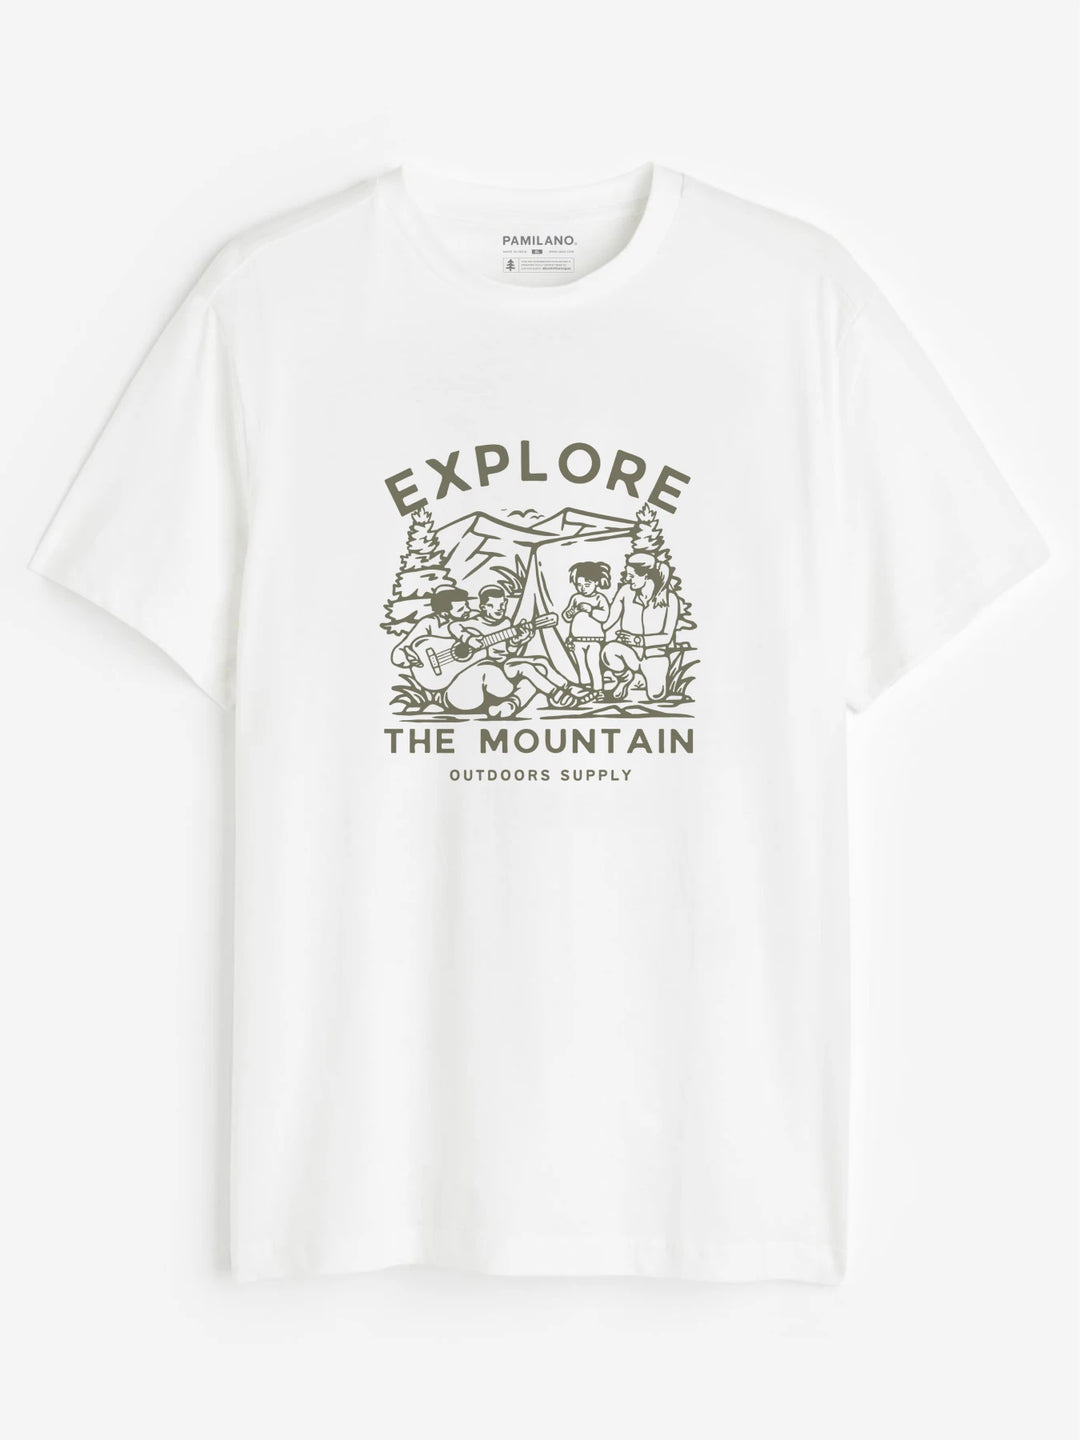 Explore The Mountain Outdoors Supply - Unisex T-Shirt